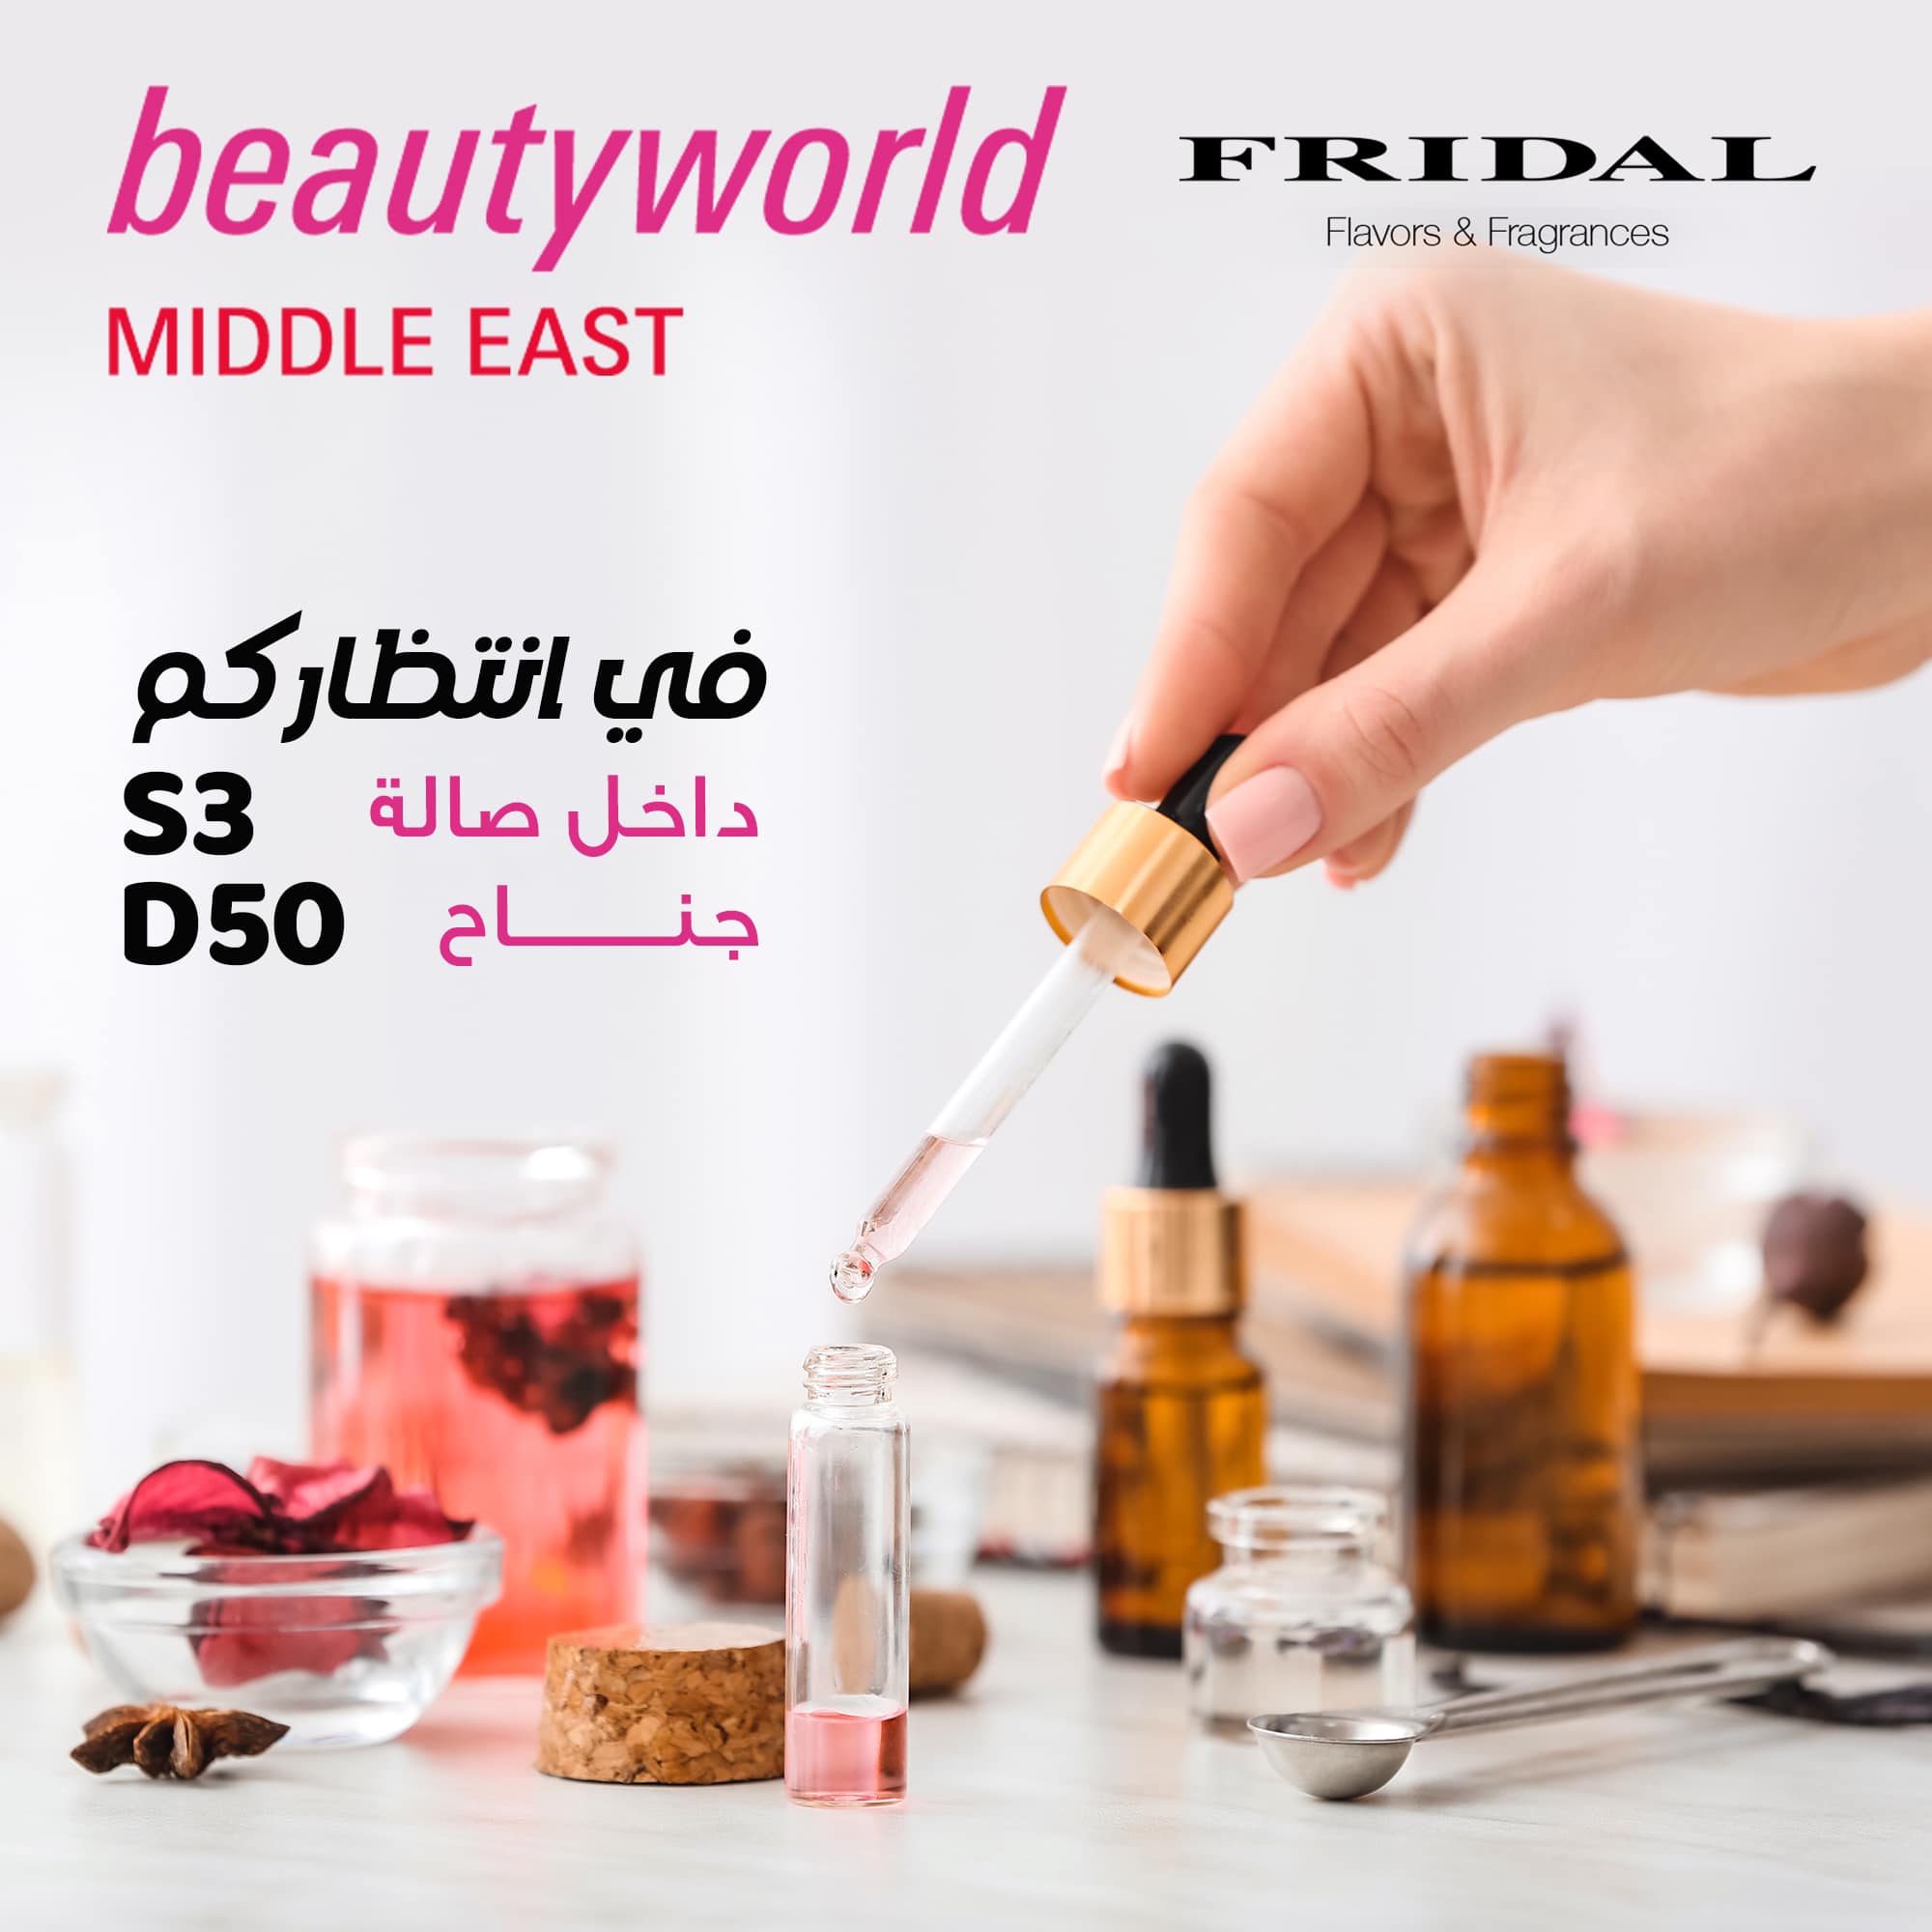 Beauty World Middle East